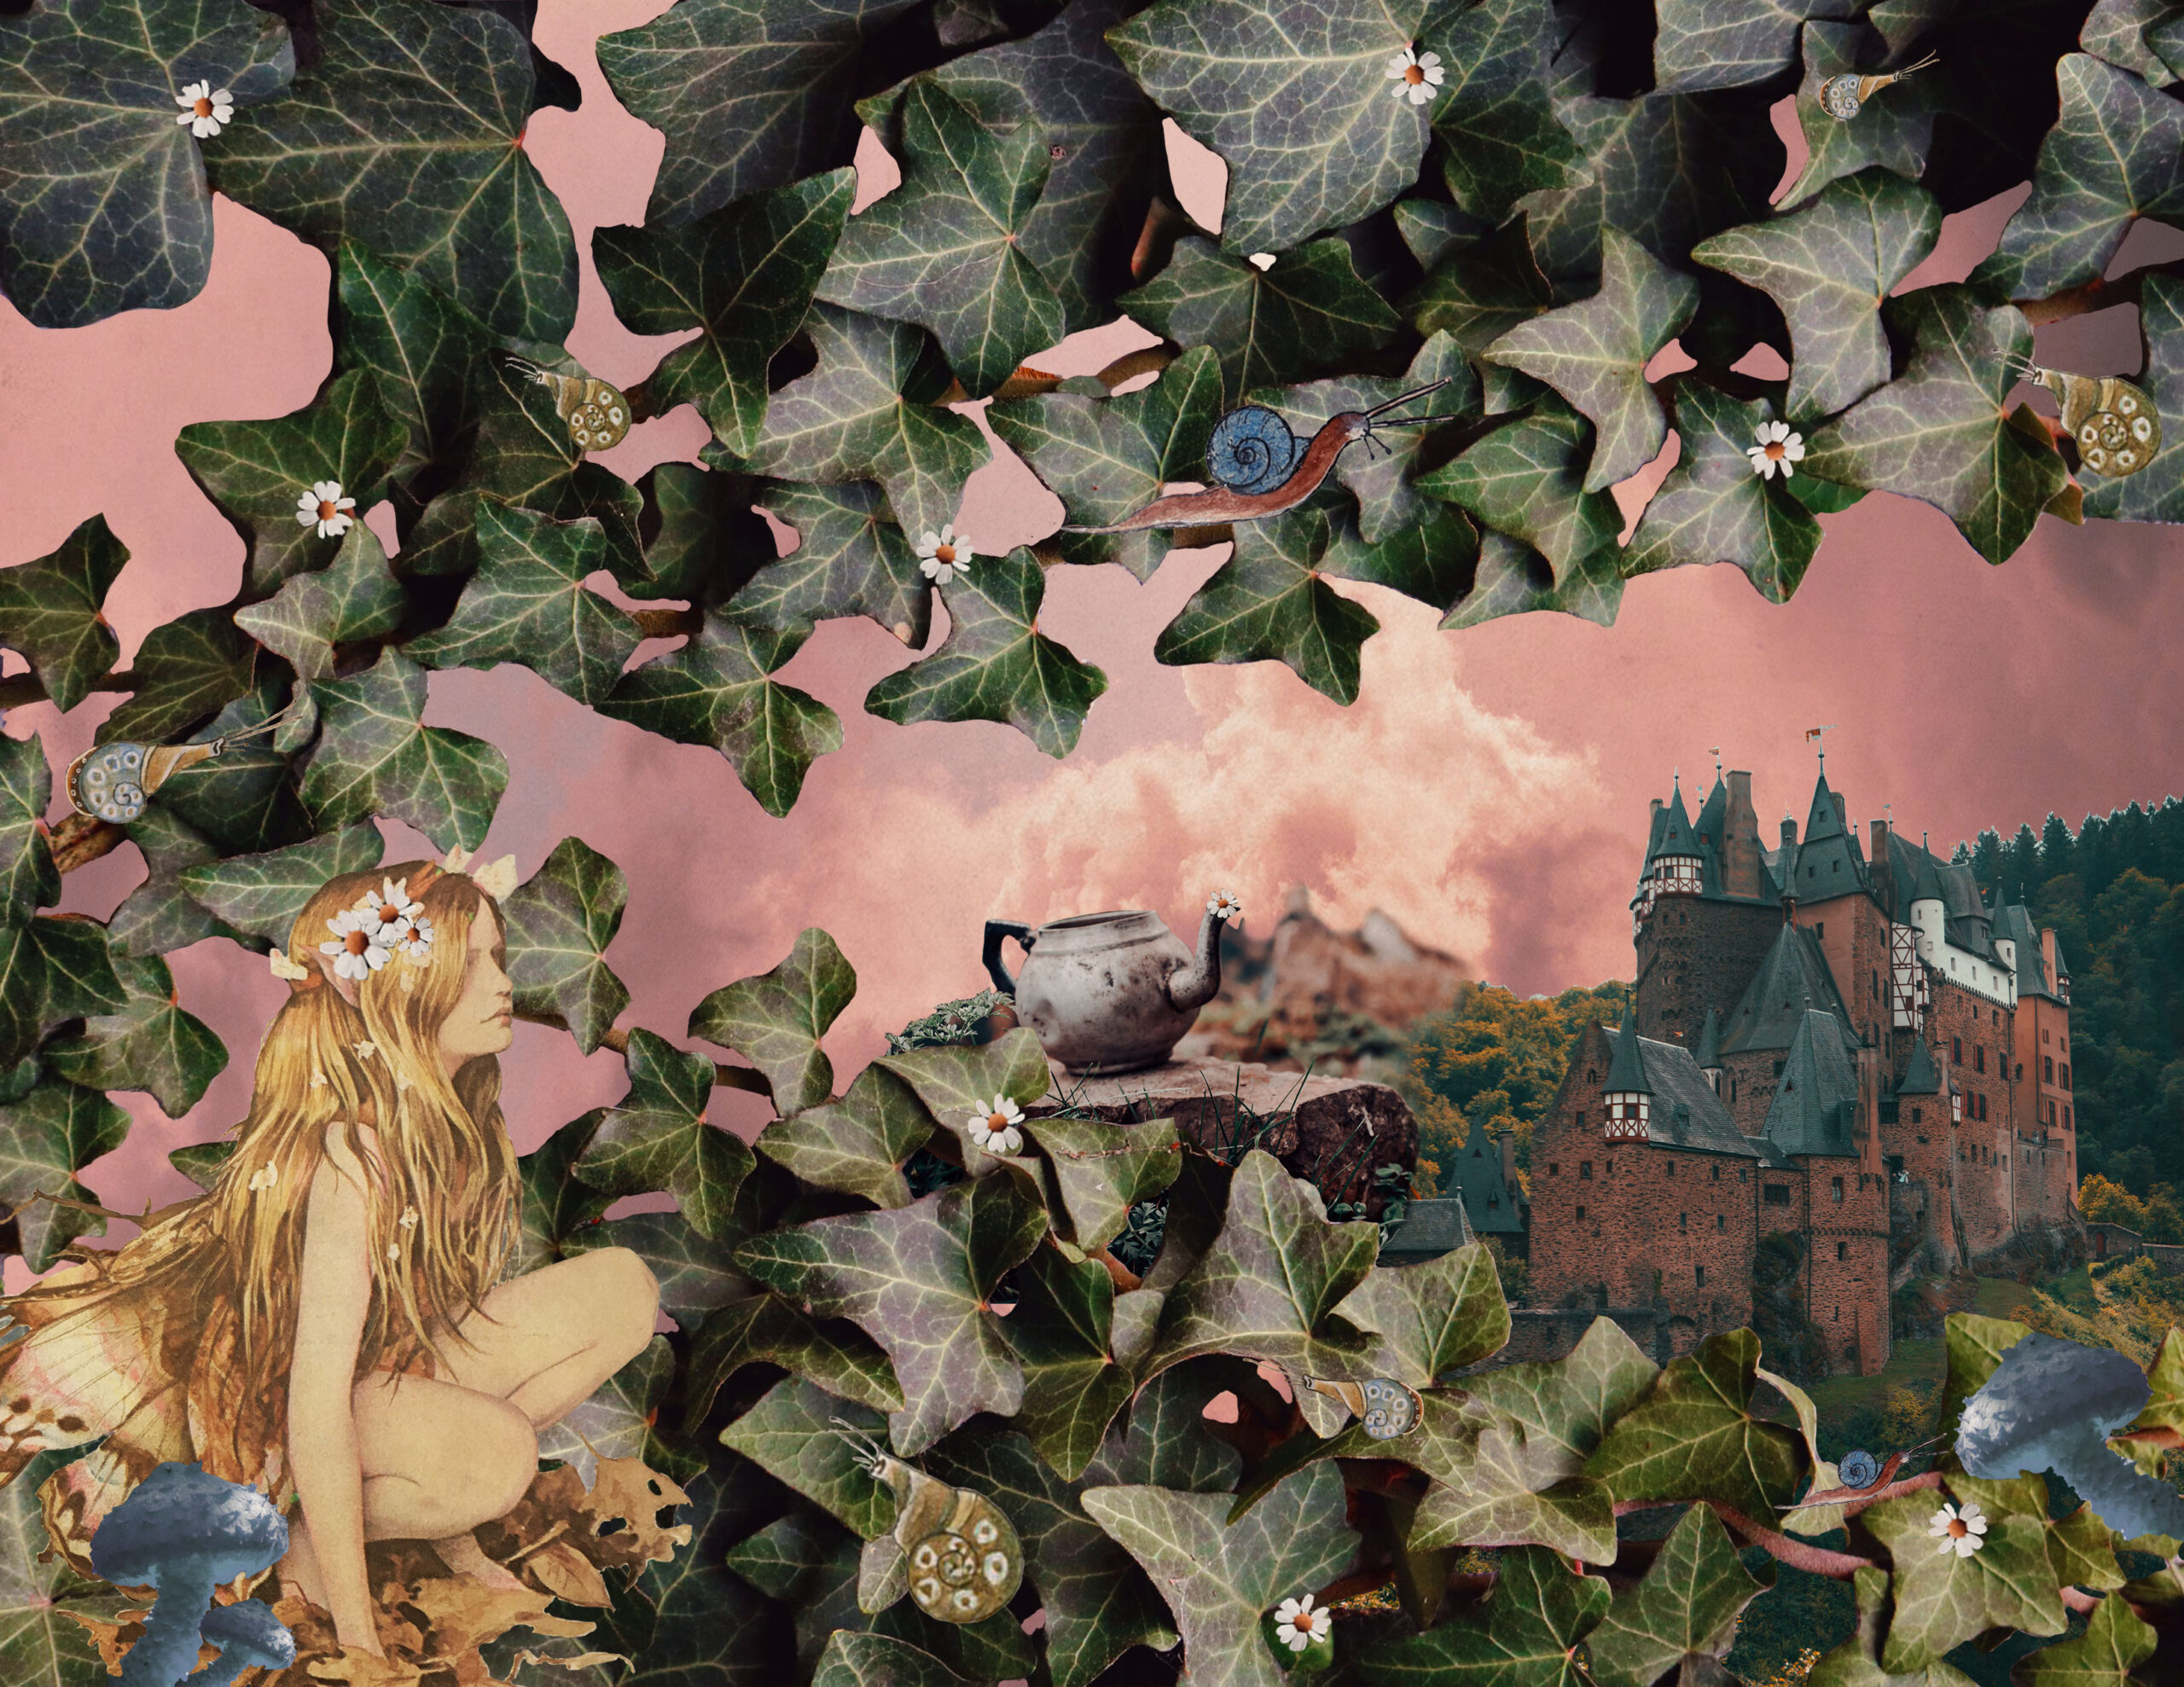 This inspiration board illustrates my interpretation of dreams and fantasy, or of woolgathering which means an indulgence in idle daydreaming. The inspiration images represent things that could initiate daydreams such as old castles or whimsical nature.